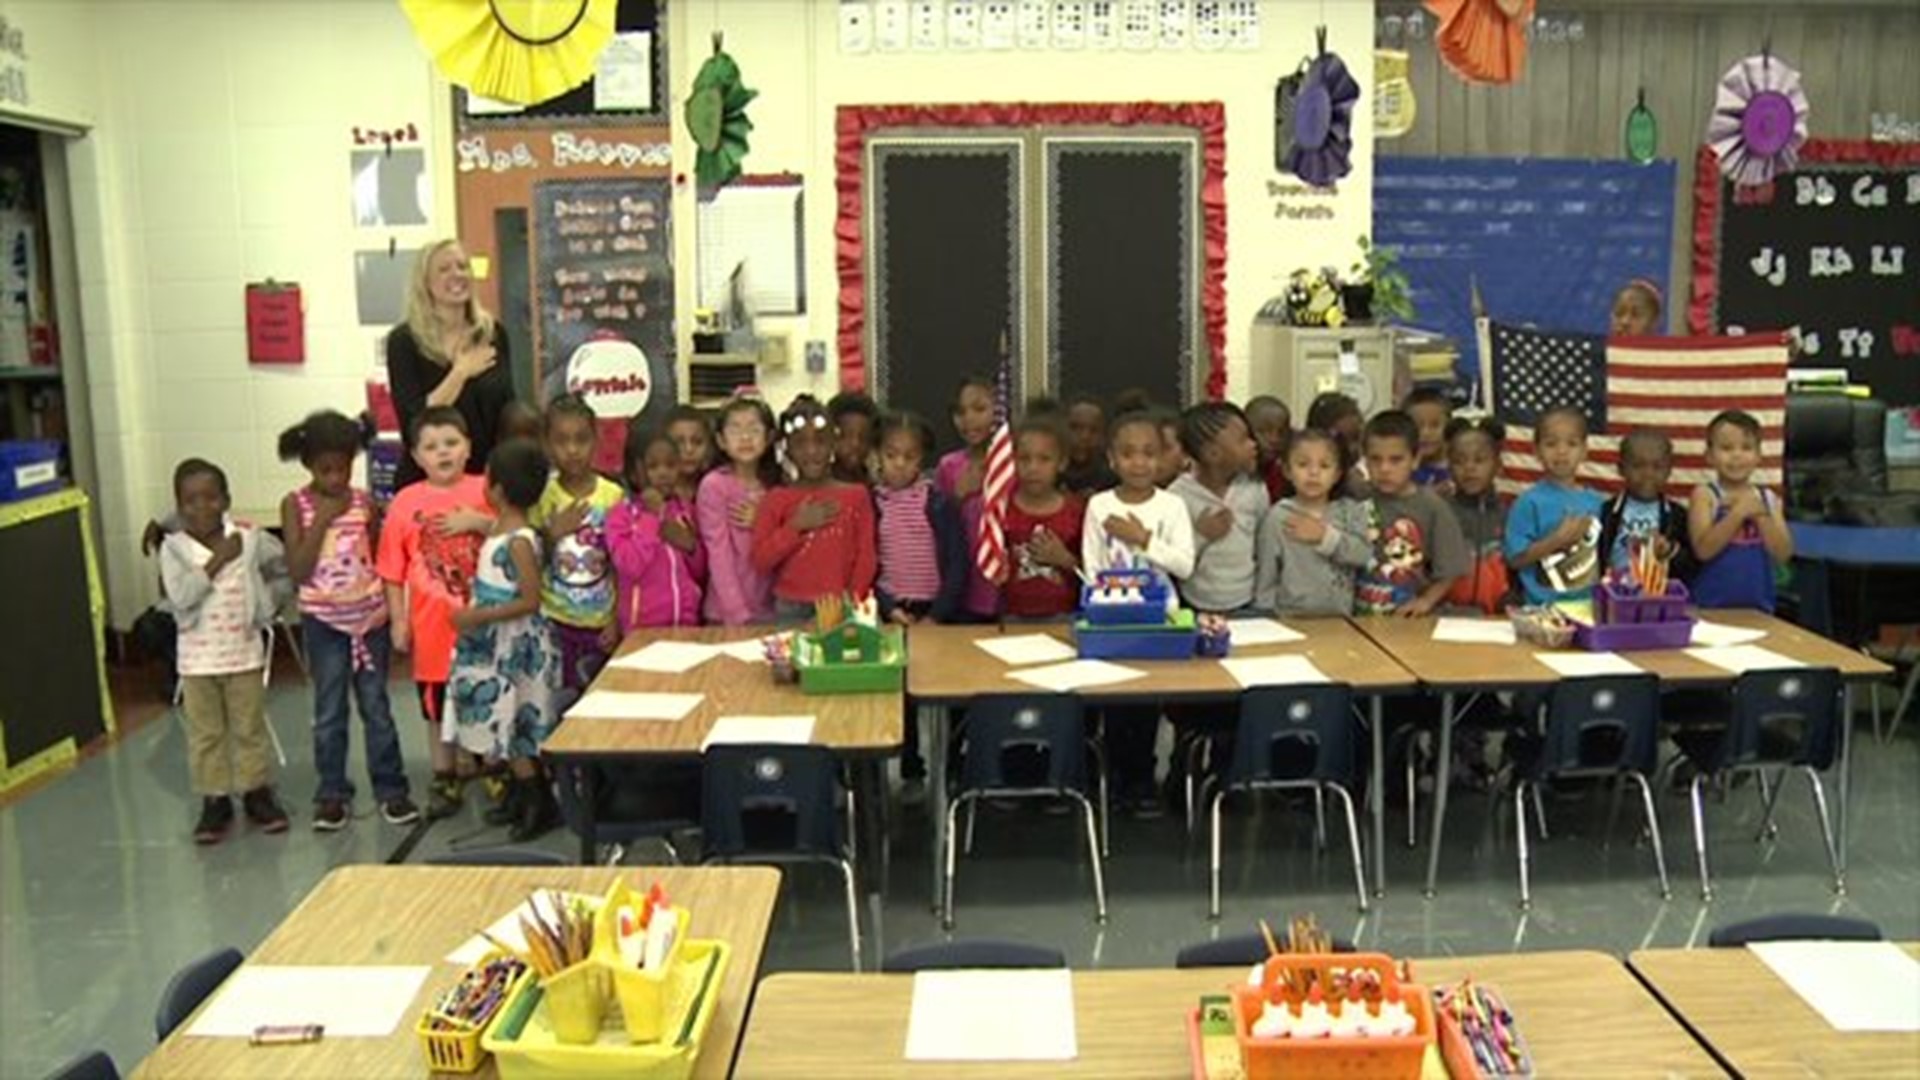 Mrs. Reeves` class says the Pledge of Allegiance